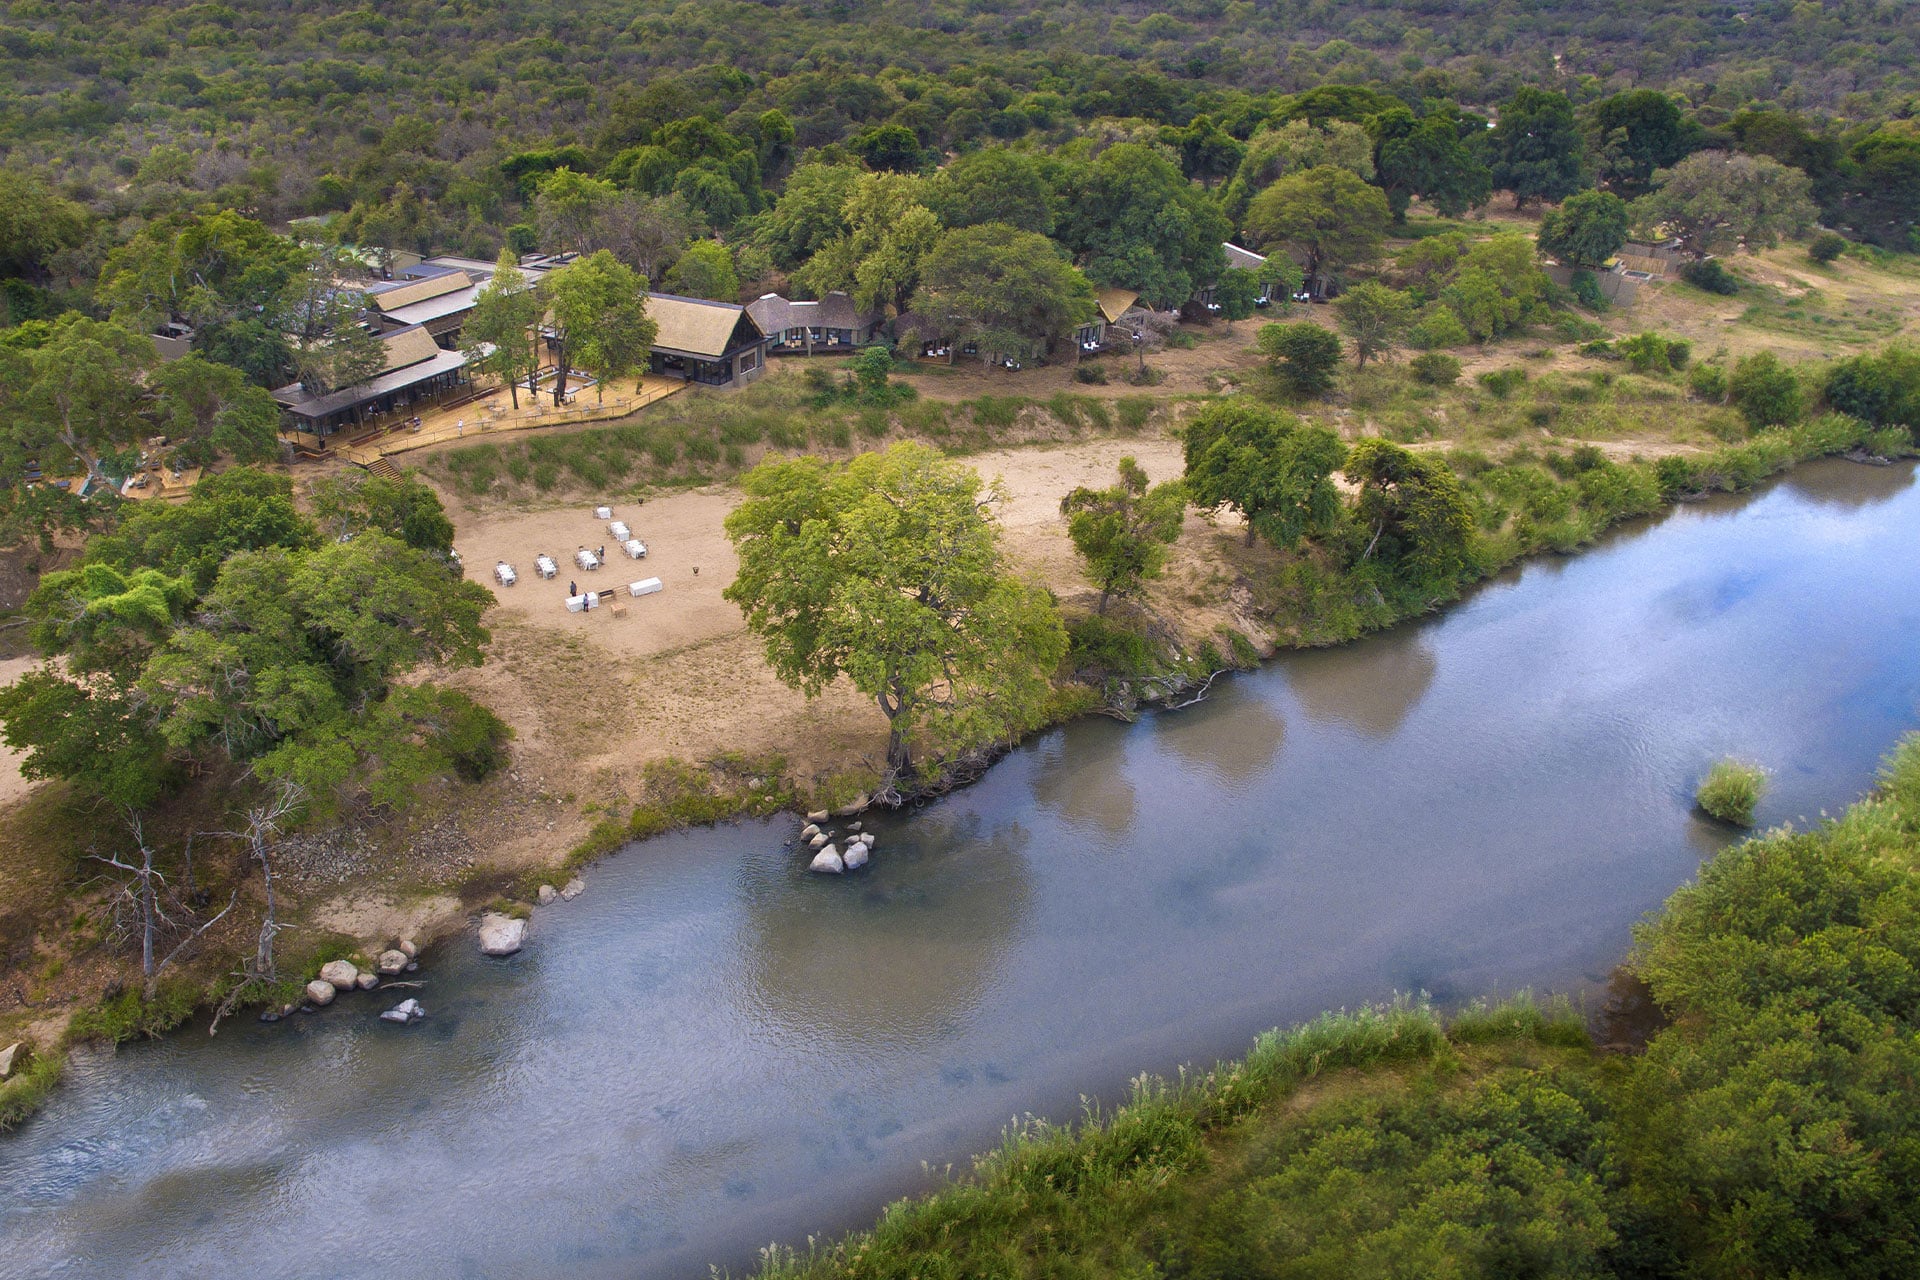 An aerial view of Lion Sands River Lodge and the Sabie River in Sabi Sands Game Reserve.